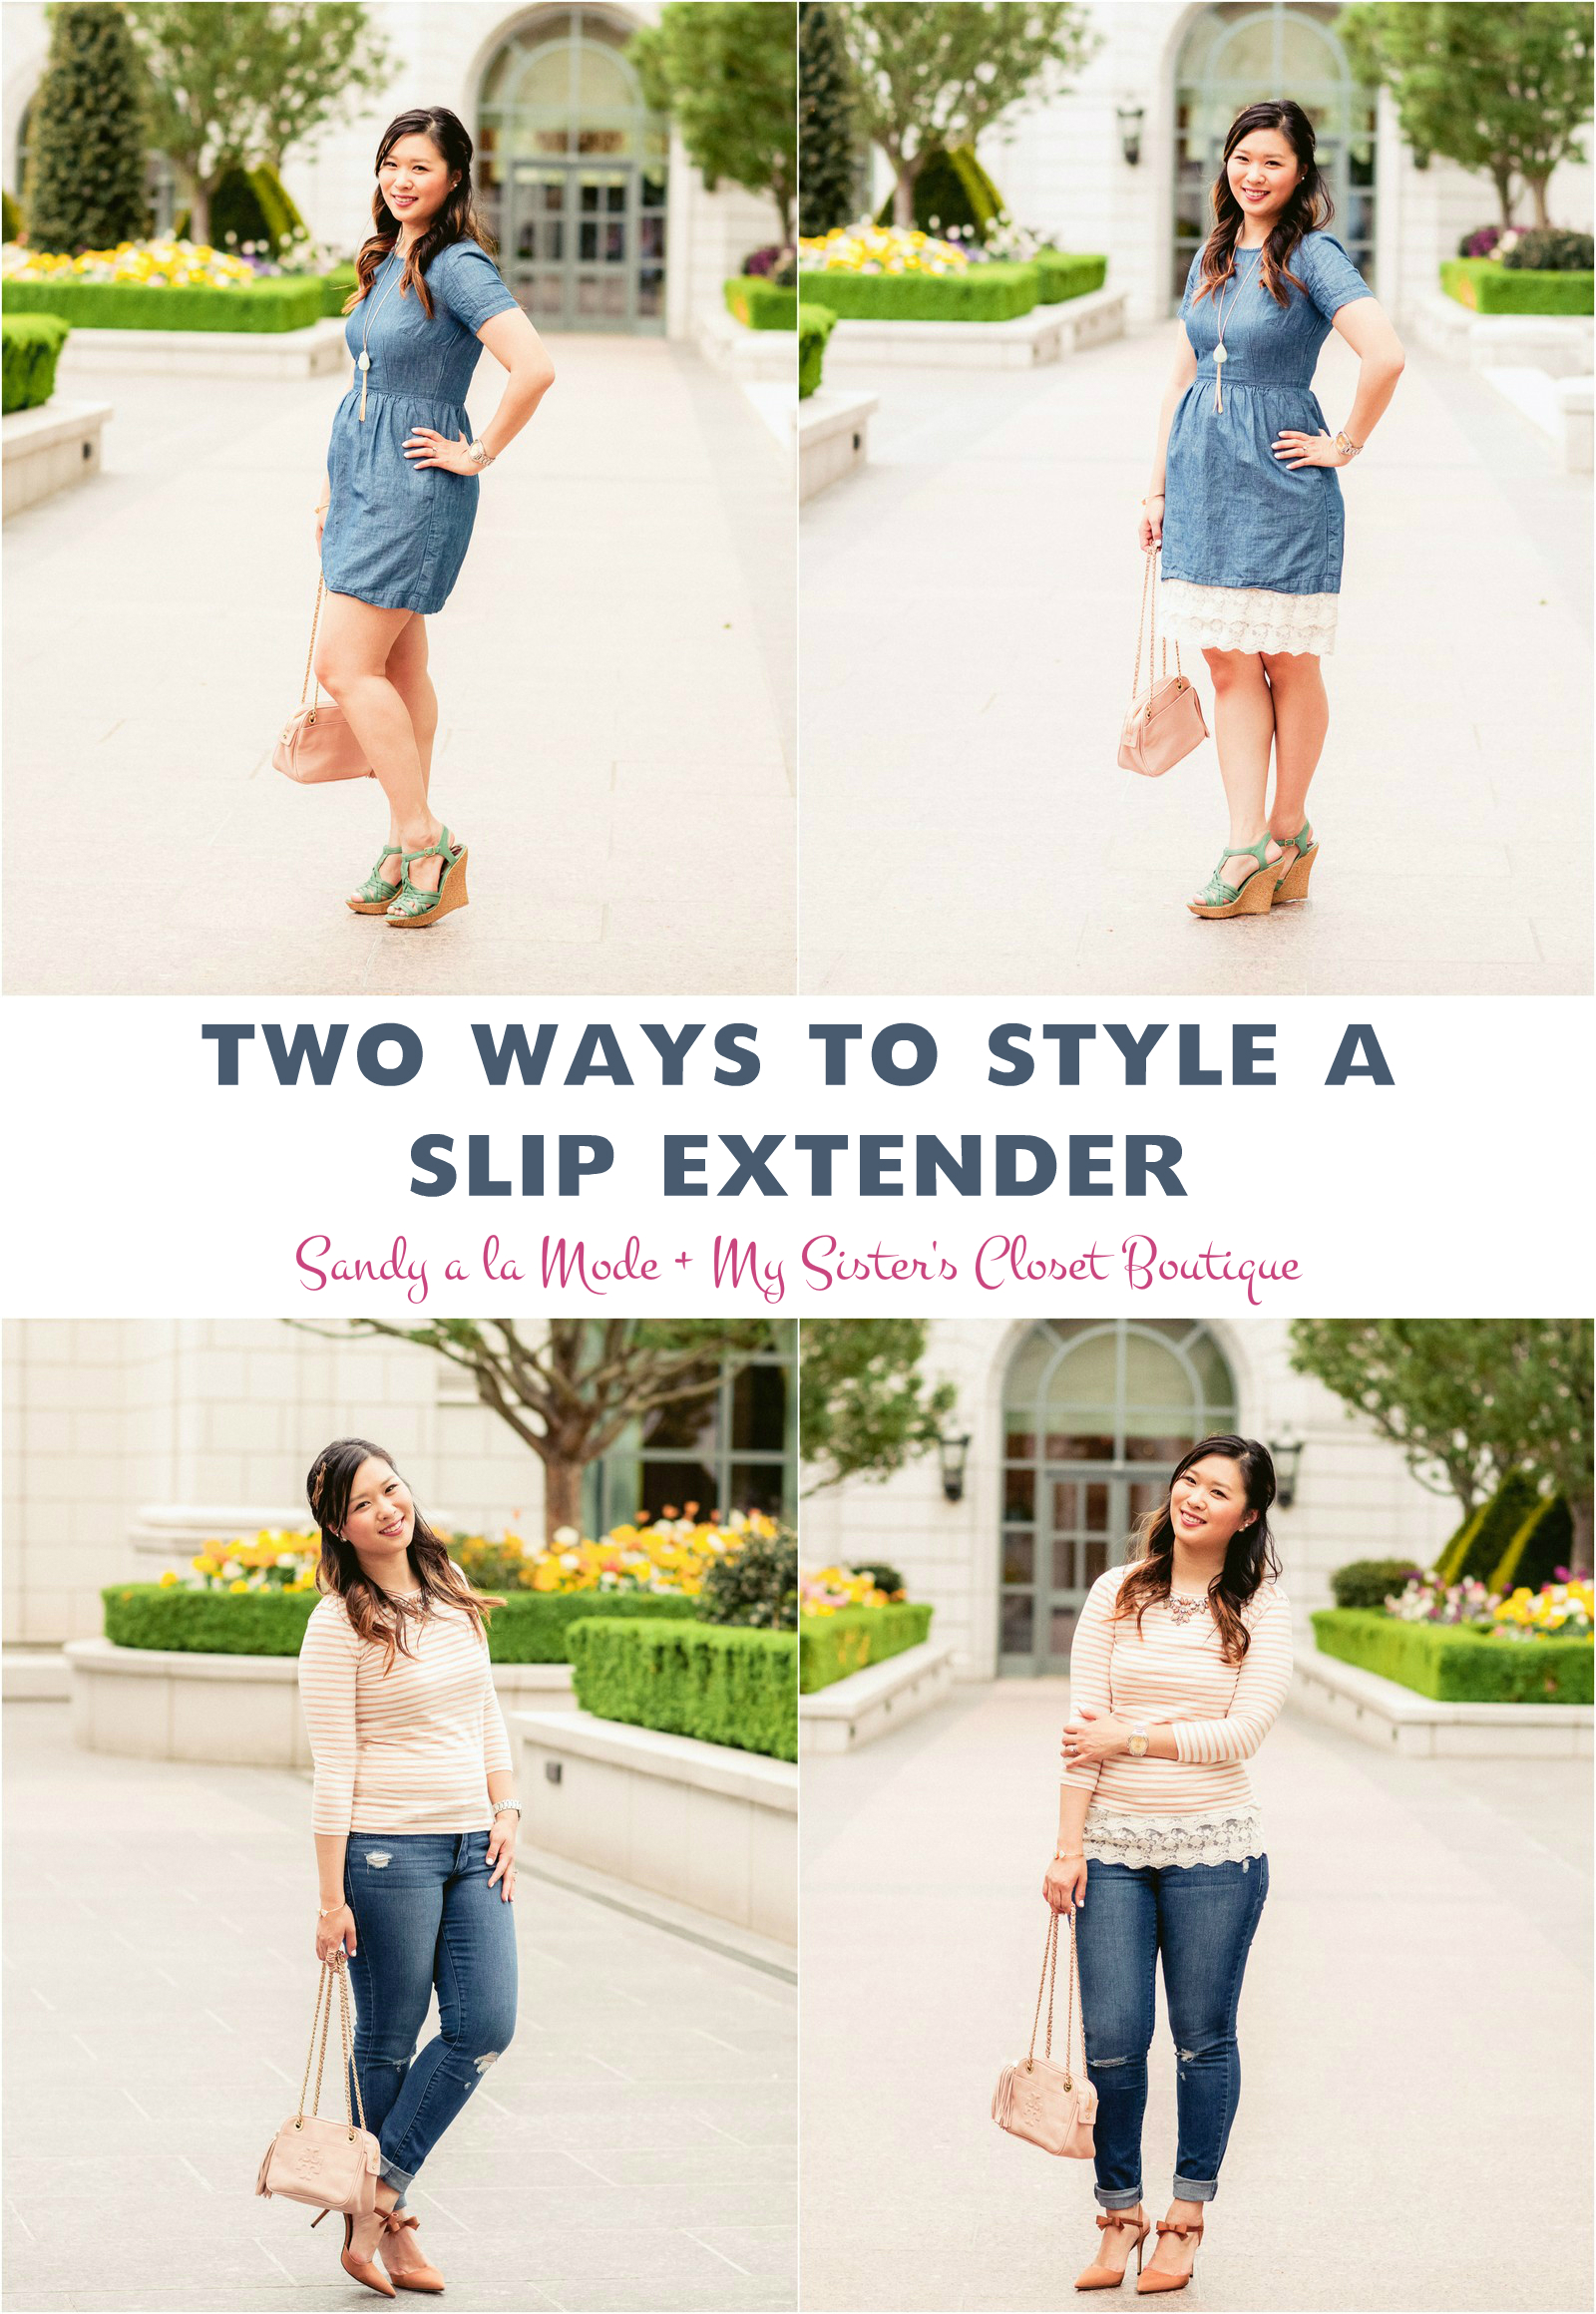 Sandy a la Mode | Fashion Blogger - Two Ways To Style A Slip Extender with My Sister's Closet Boutique